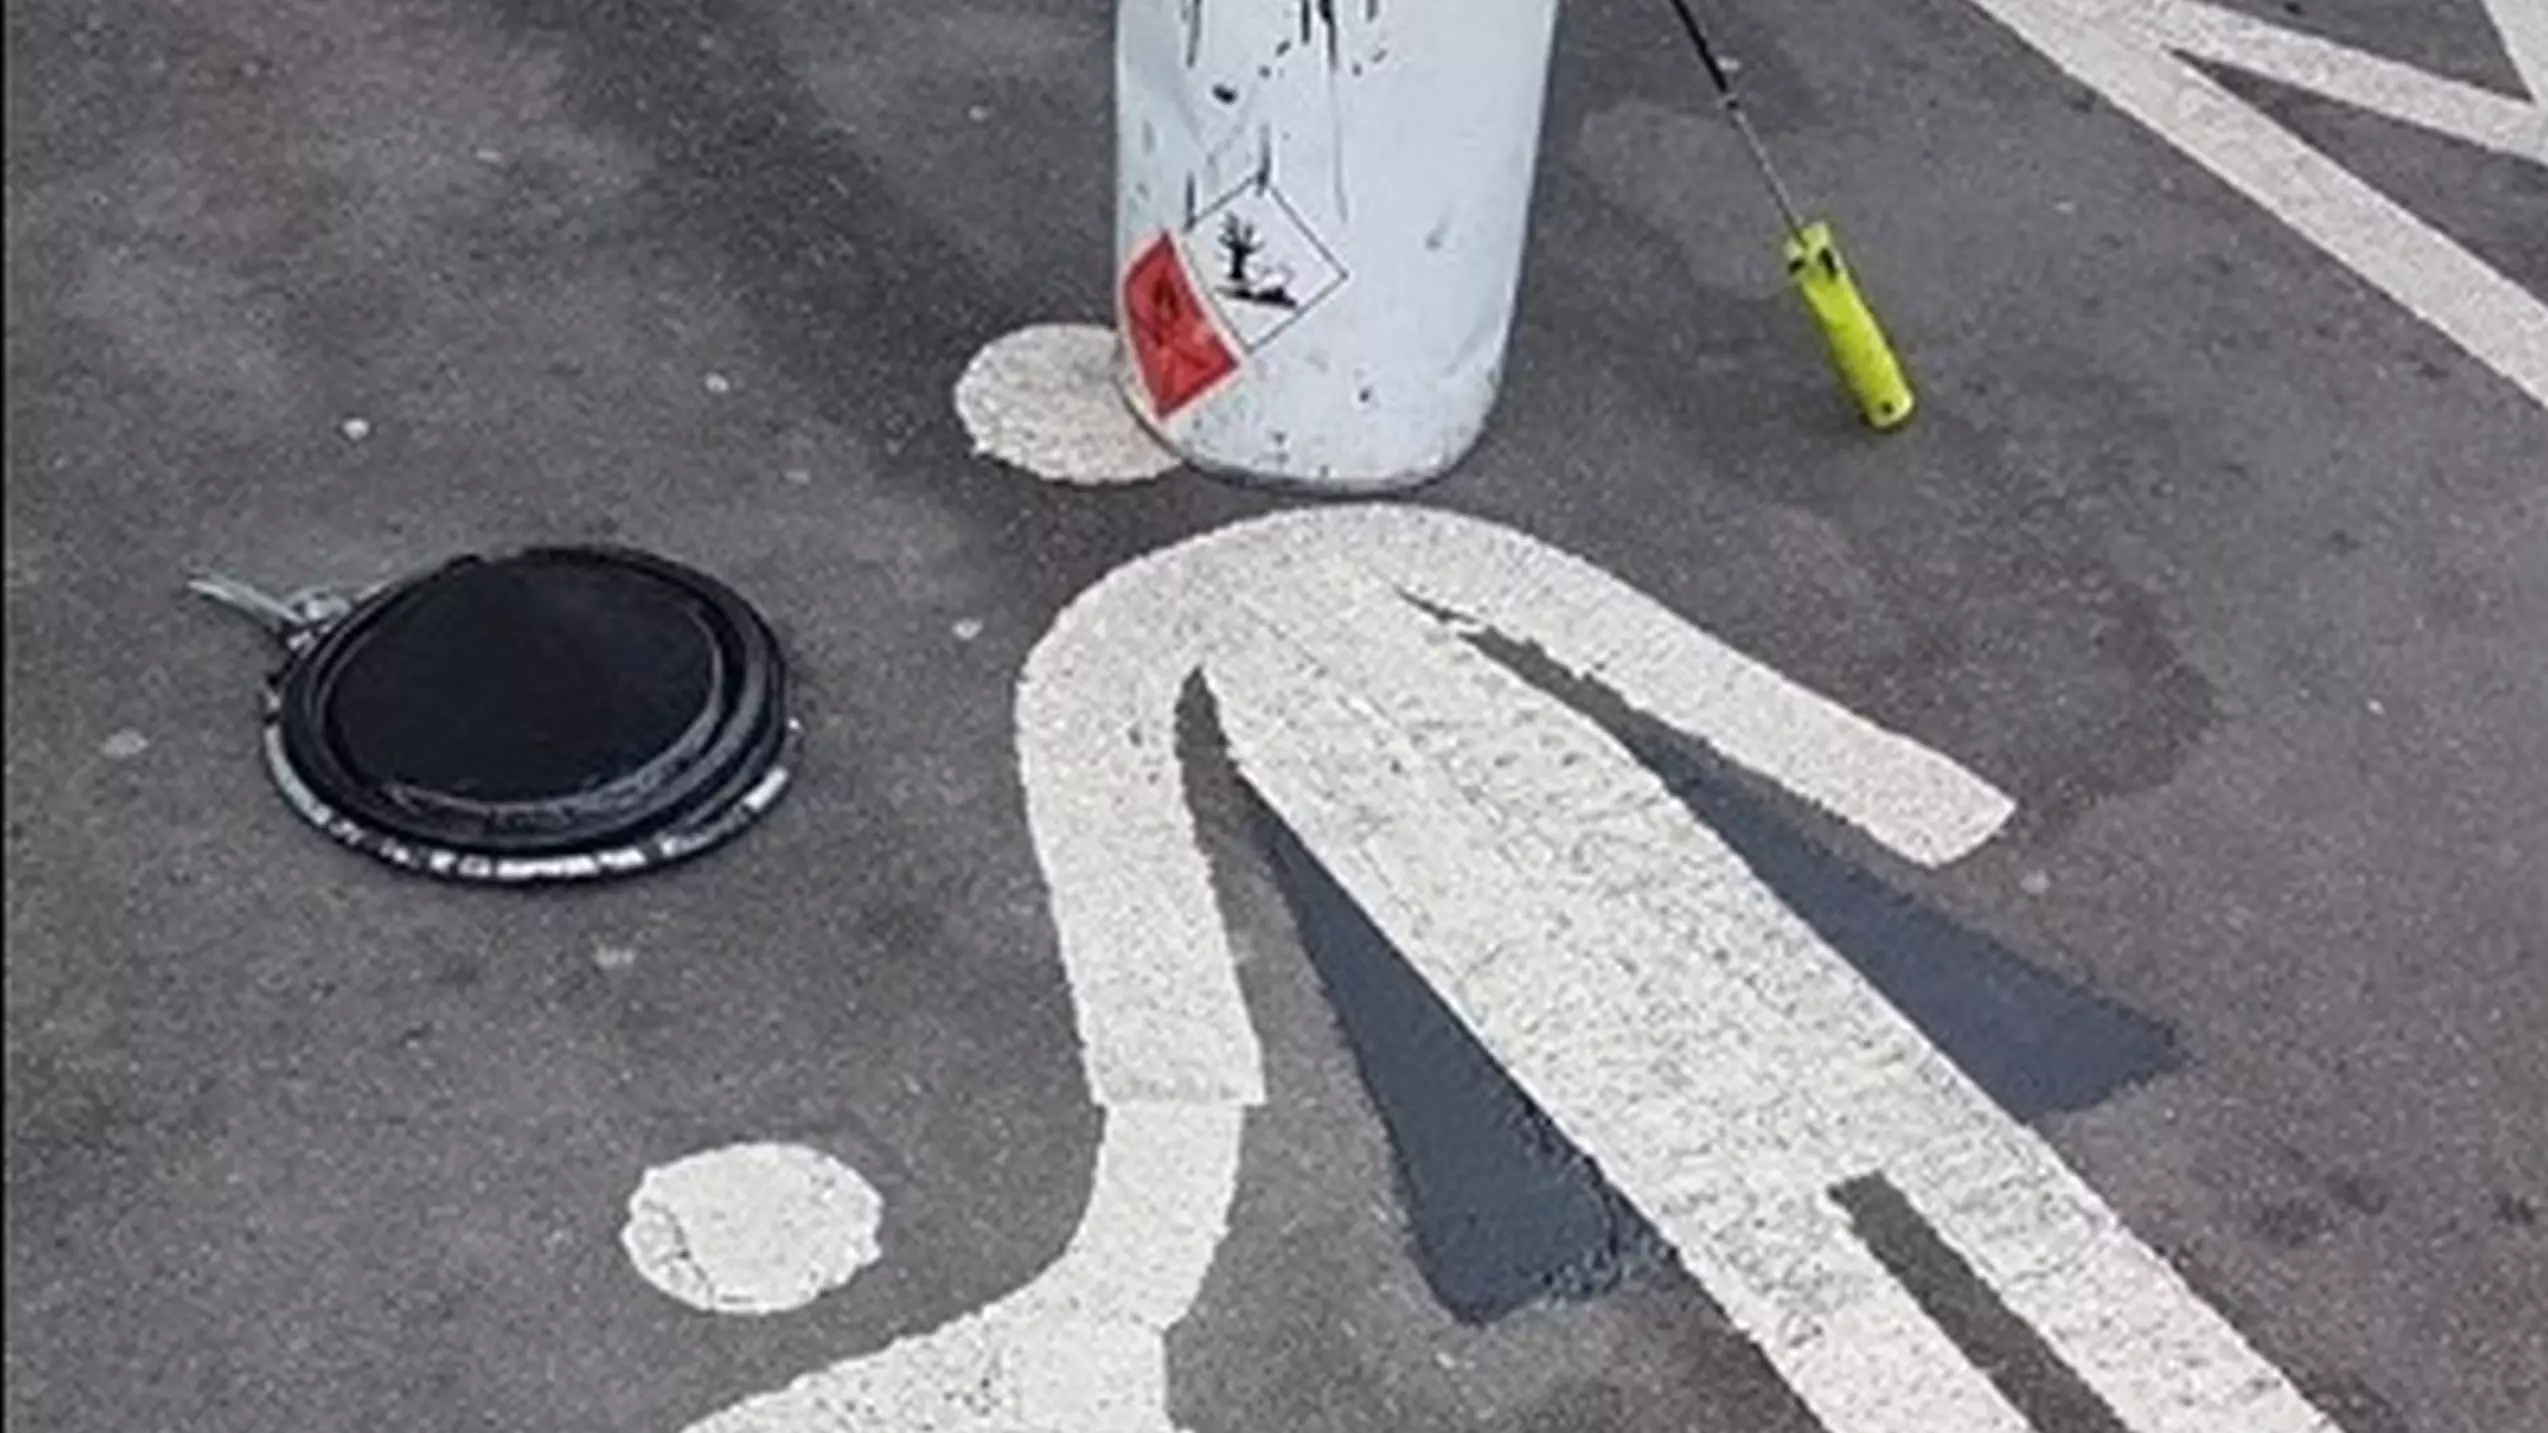 Mum Slams Decision To Paint Over Skirt In Aldi Parent And Child Parking Bay